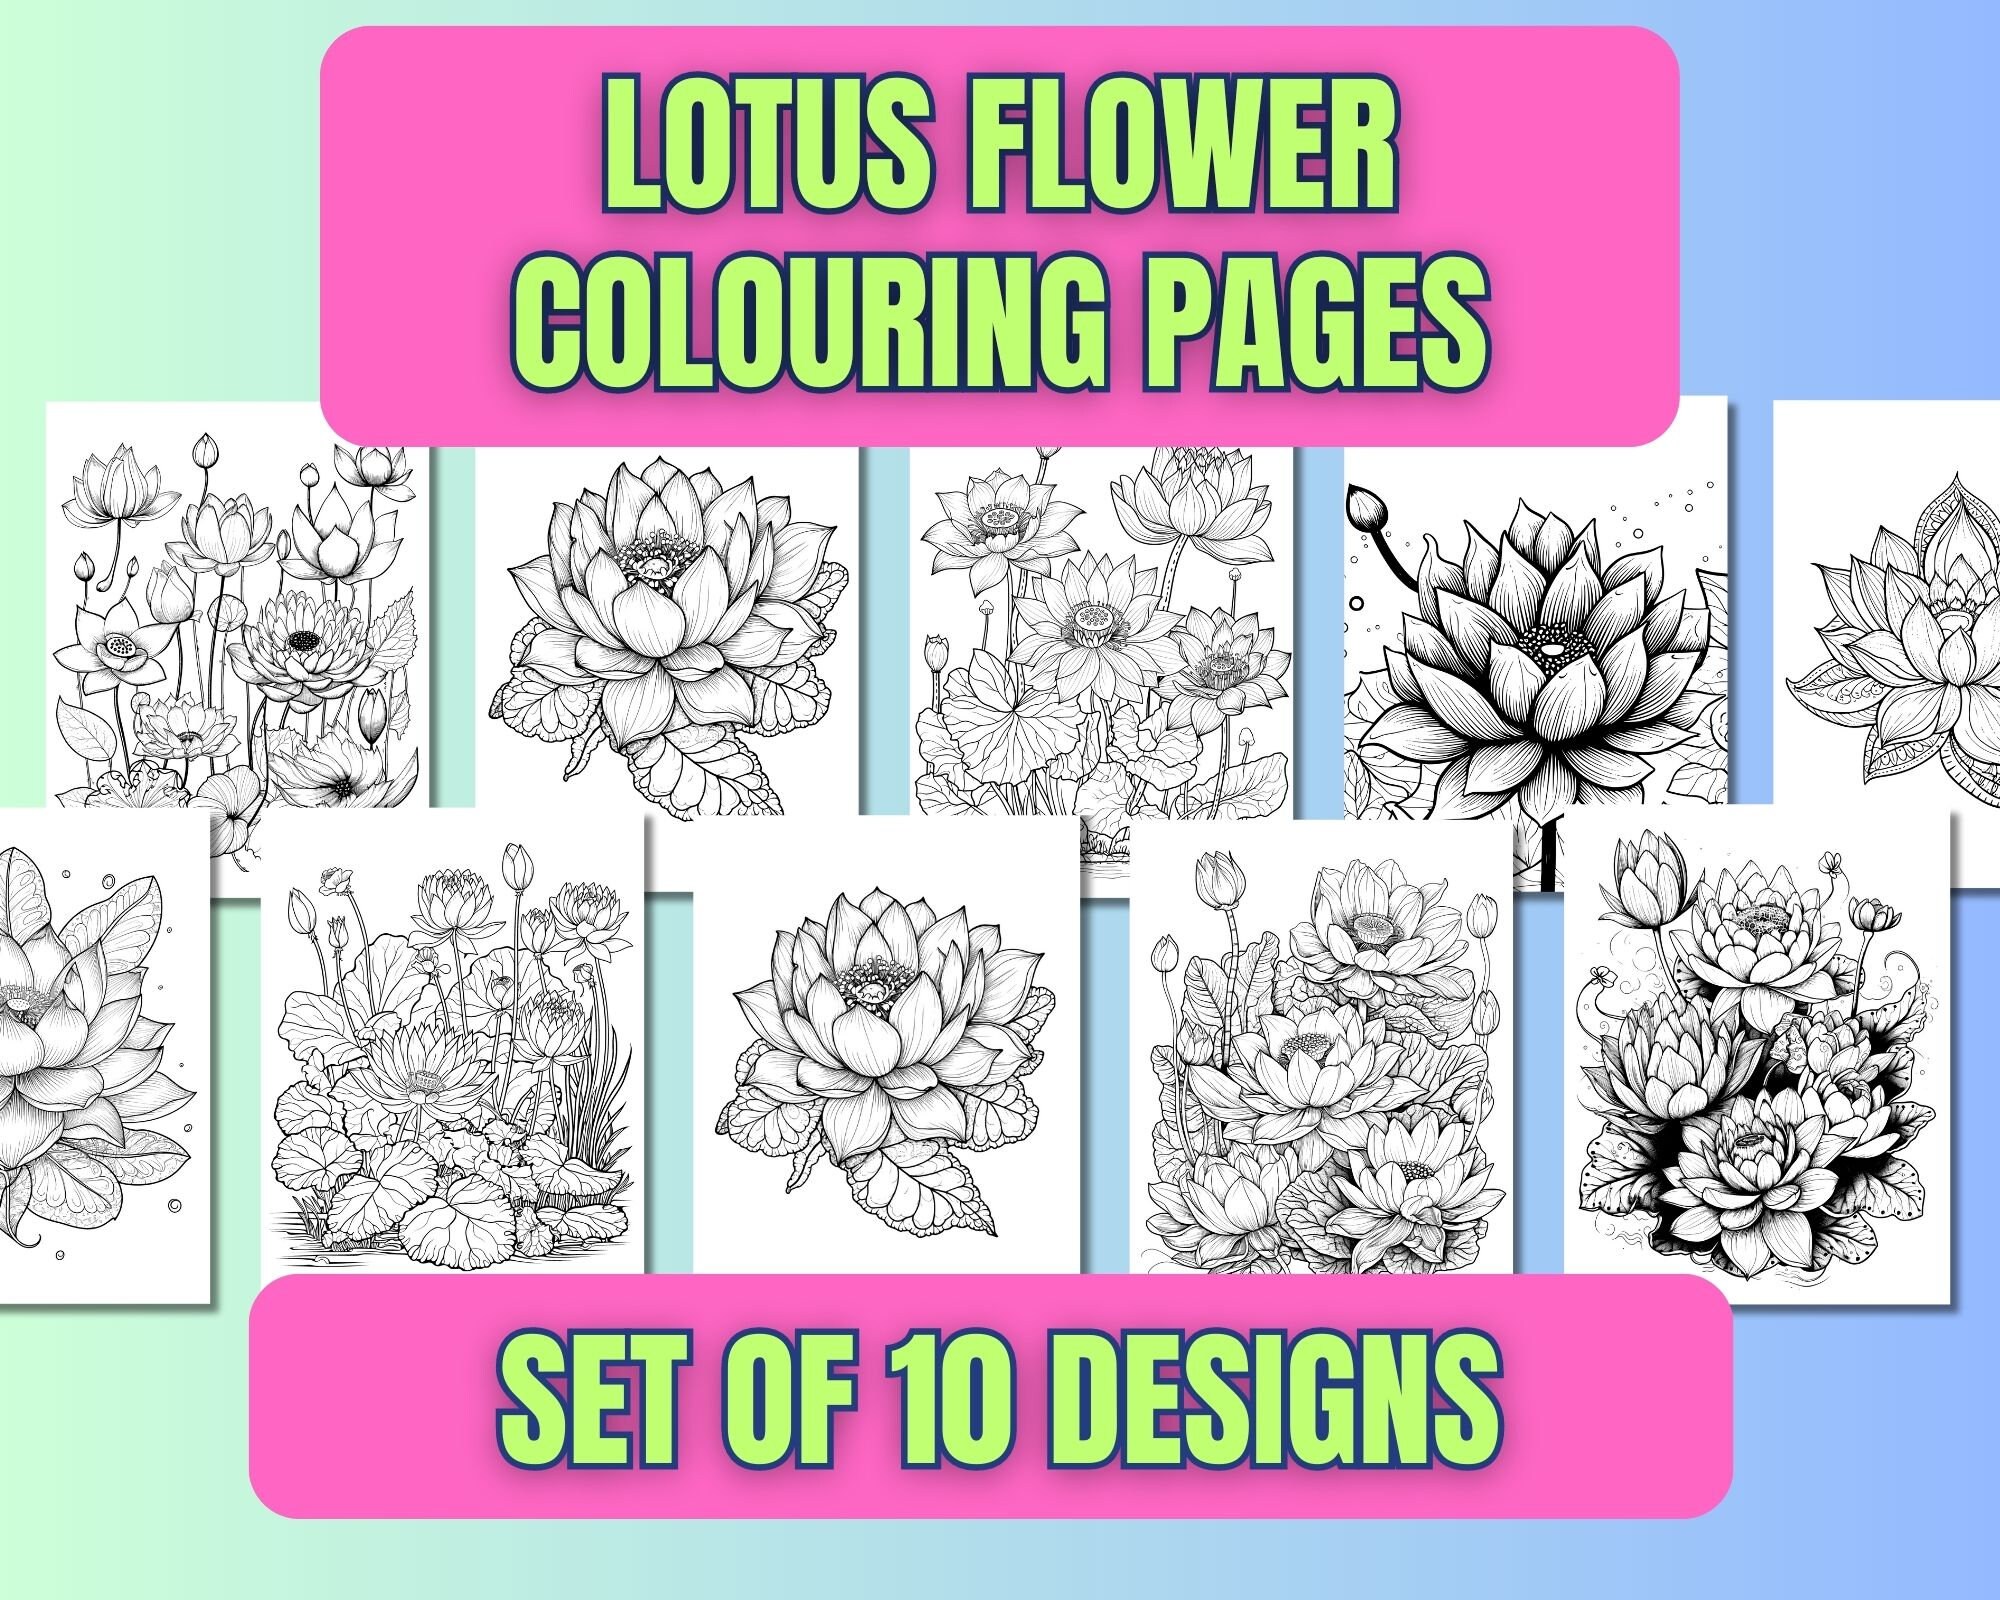 Lotus flower coloring pages water lily adult coloring book